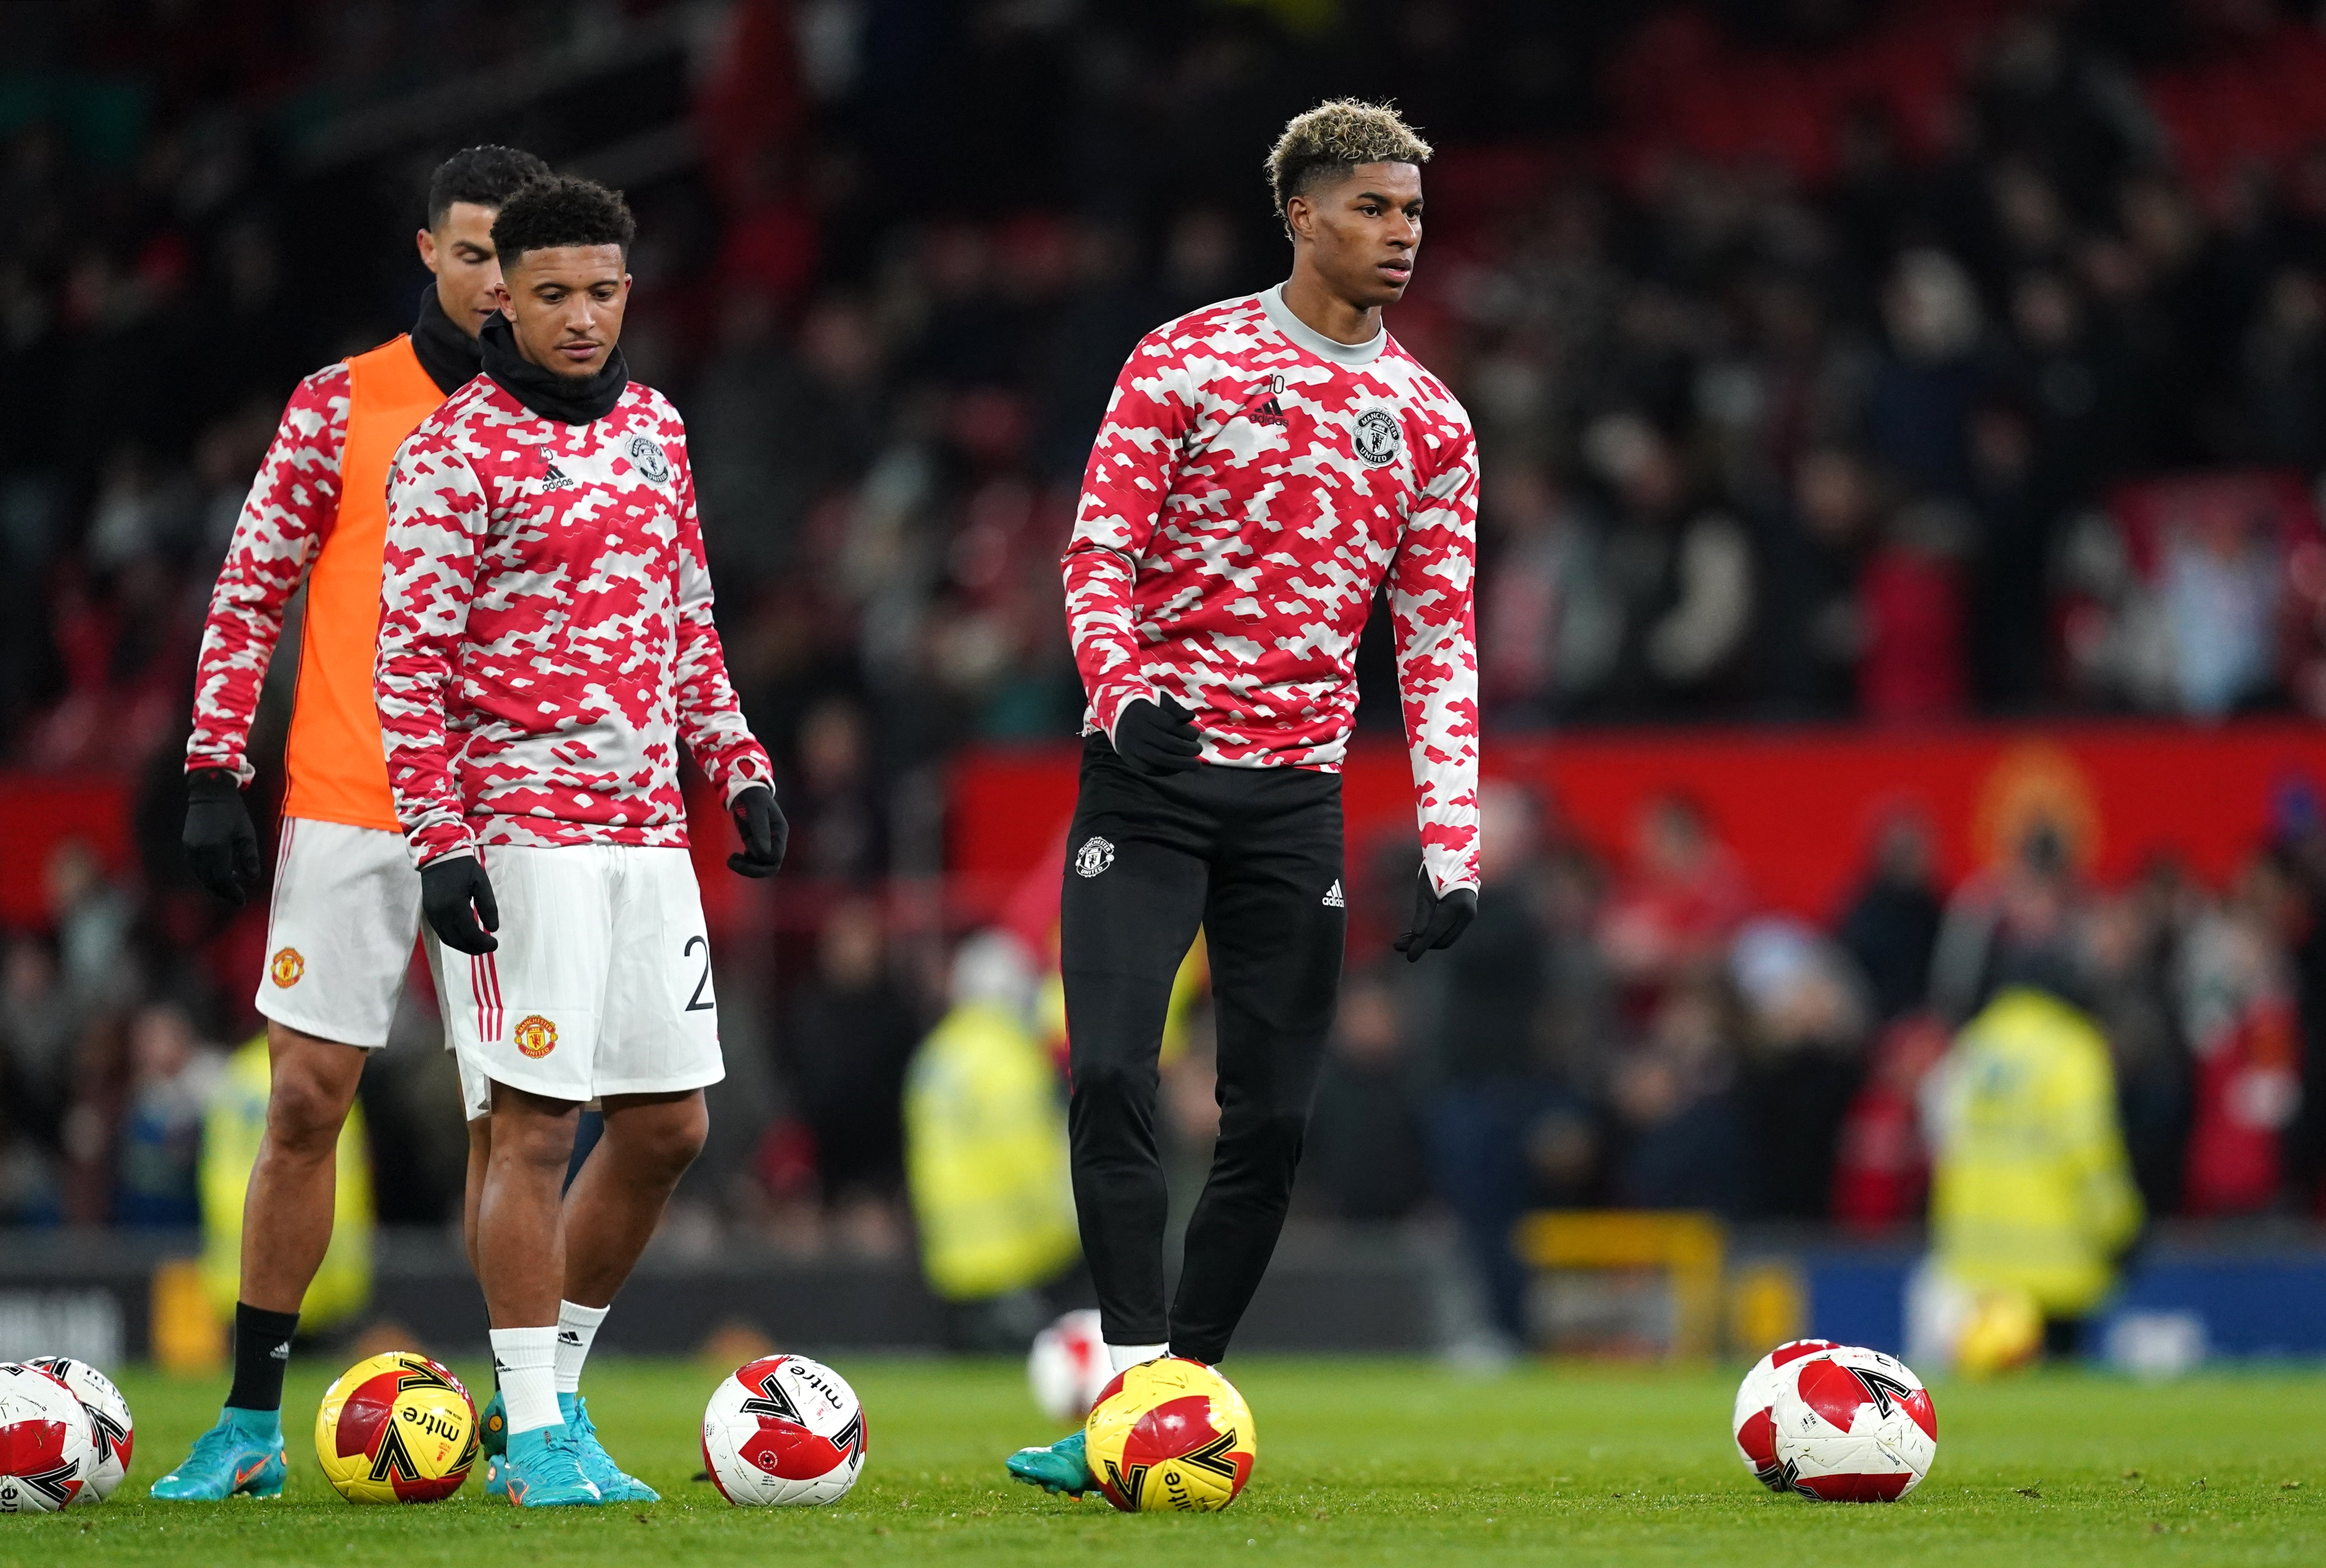 Jadon Sancho and Marcus Rashford were left out of the England squad (Martin Rickett/PA)